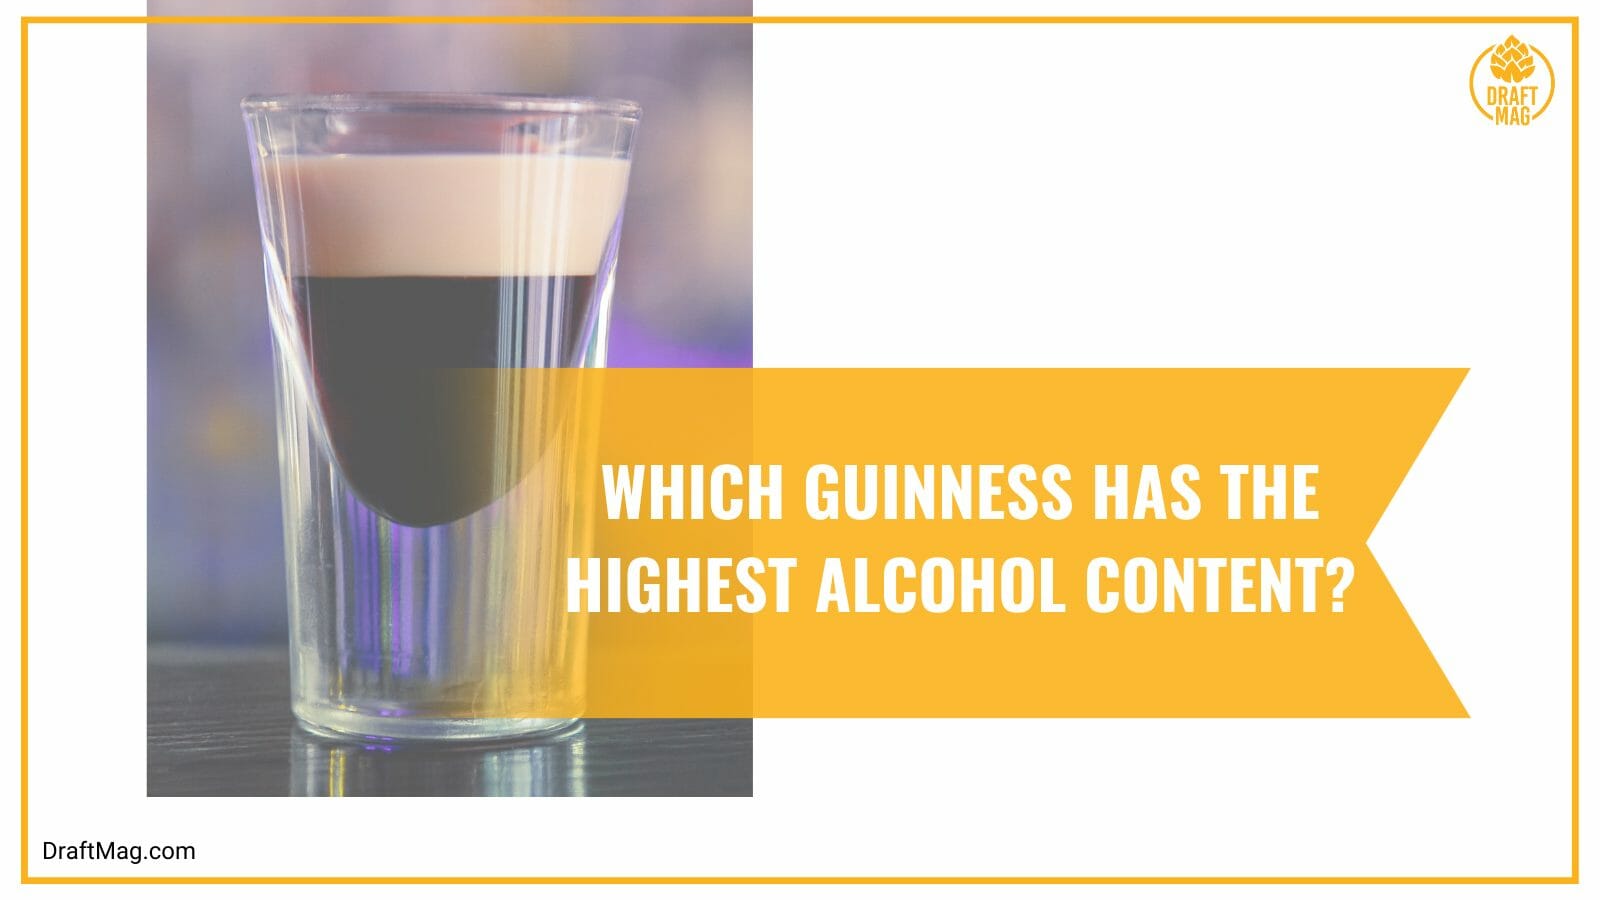 Guinness with the highest alcohol content